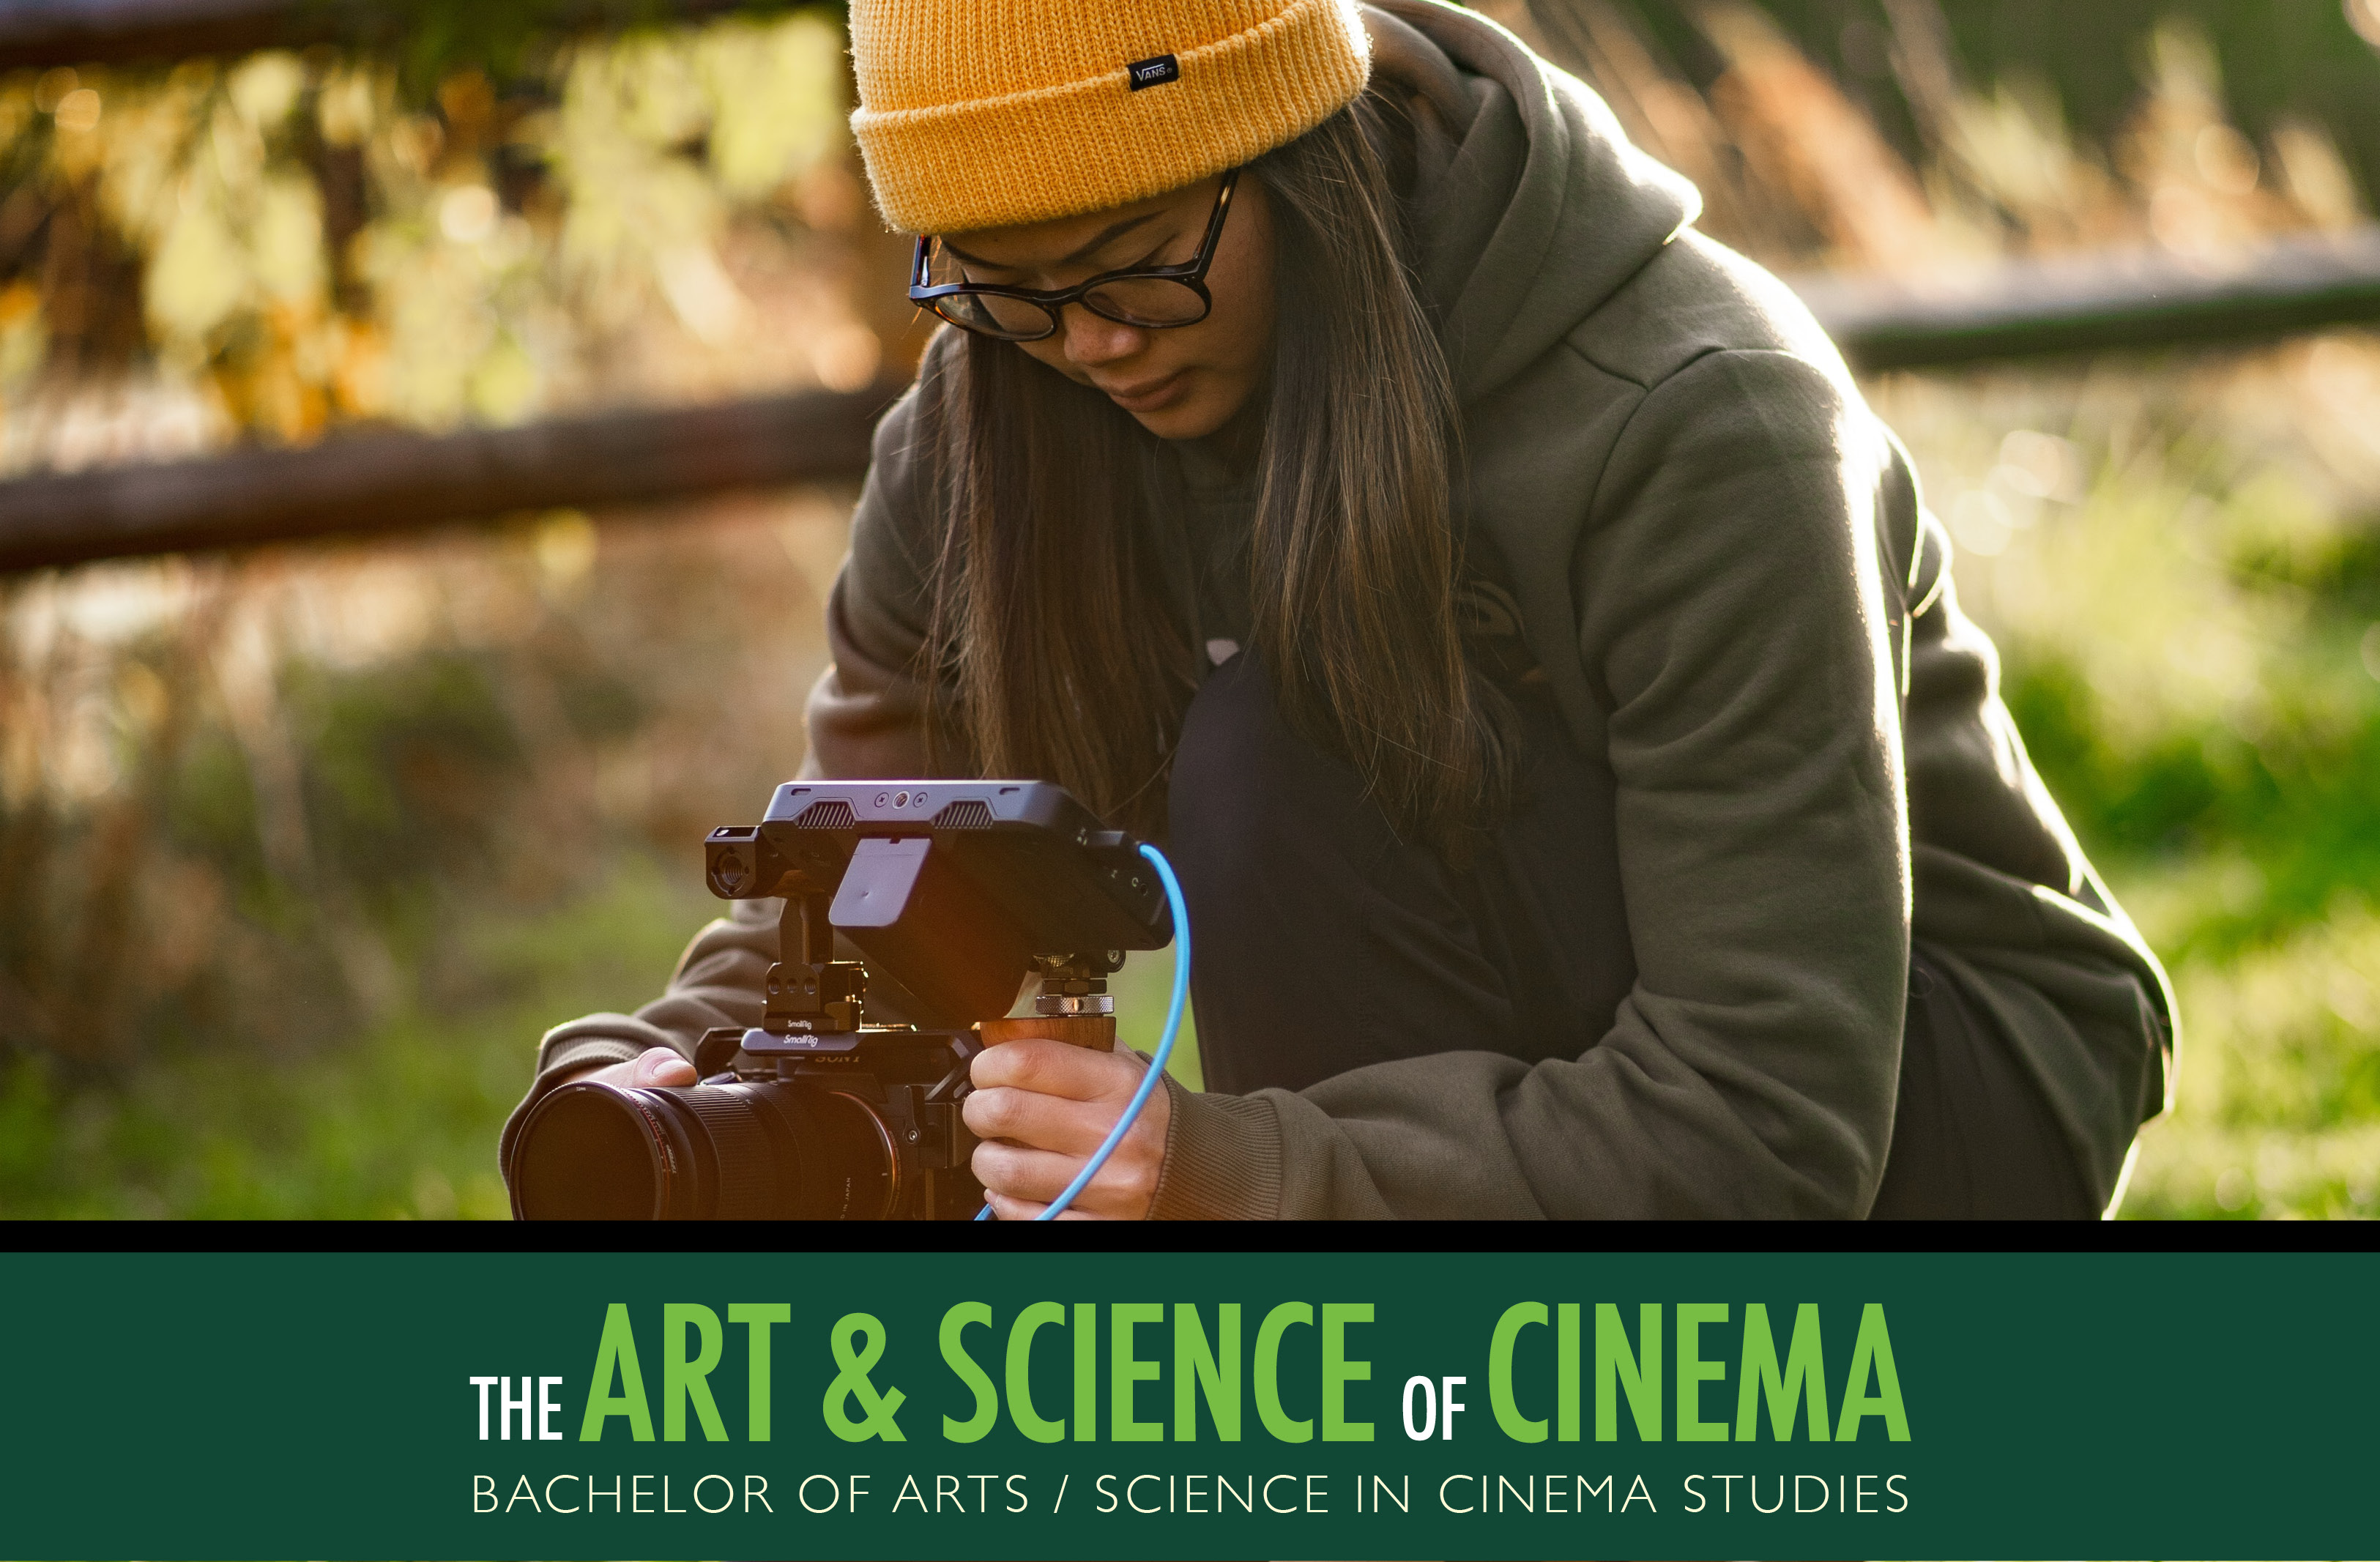 Person kneeling on the ground outside with a camera. Text at the bottom of the photo: The Art and Science of Cinema. BACHELOR OF ARTS / SCIENCE IN CINEMA STUDIES